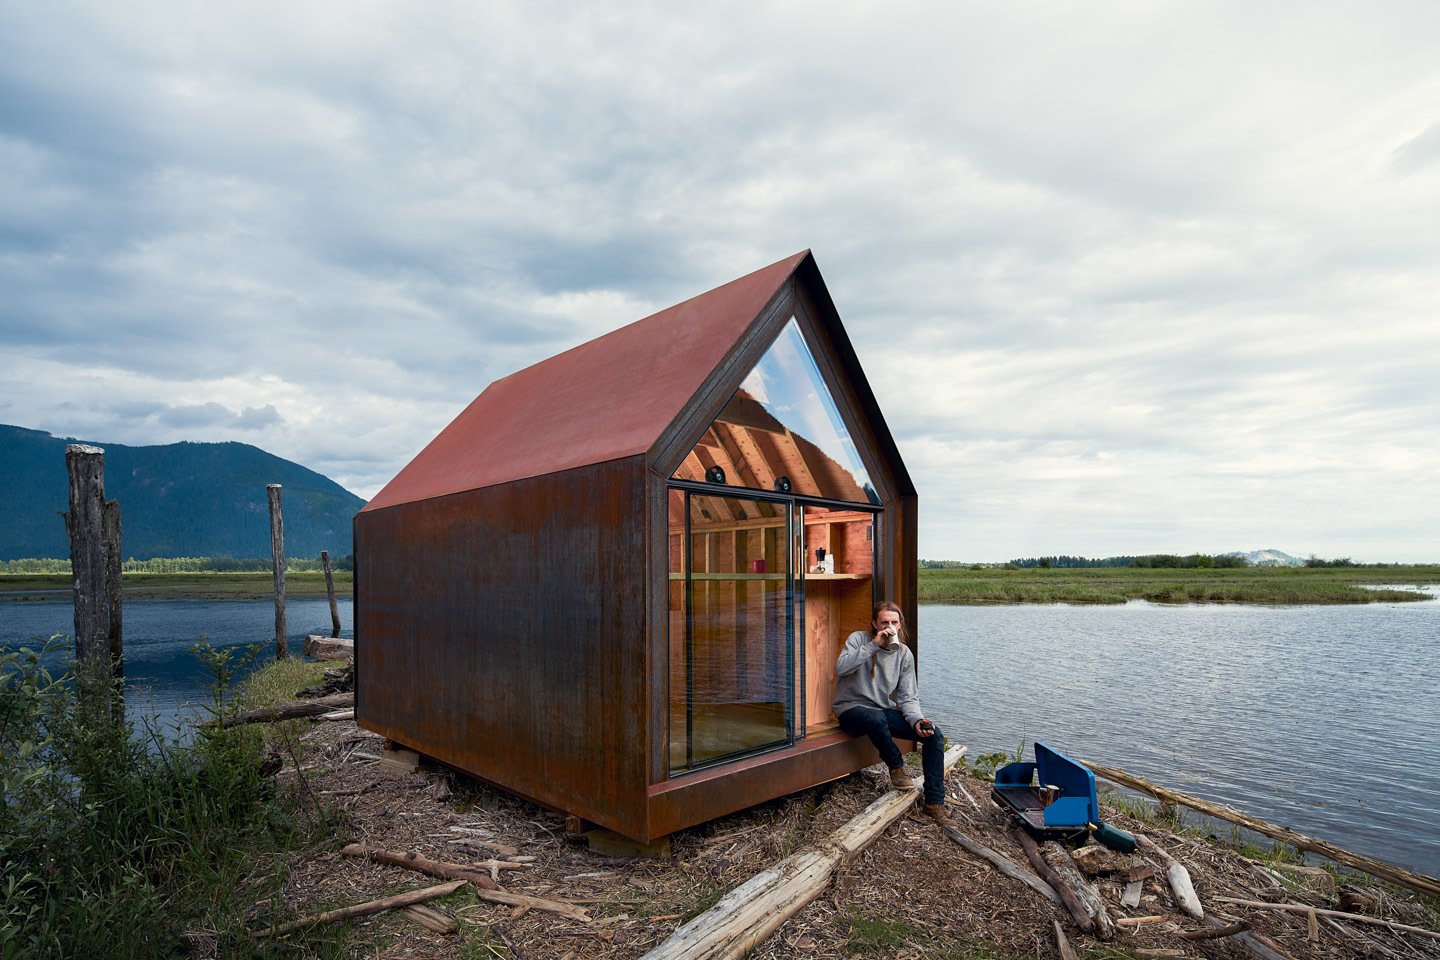 The Site Shack Is a Tiny Prefab Cabin That Sets Up Anywhere in a Snap